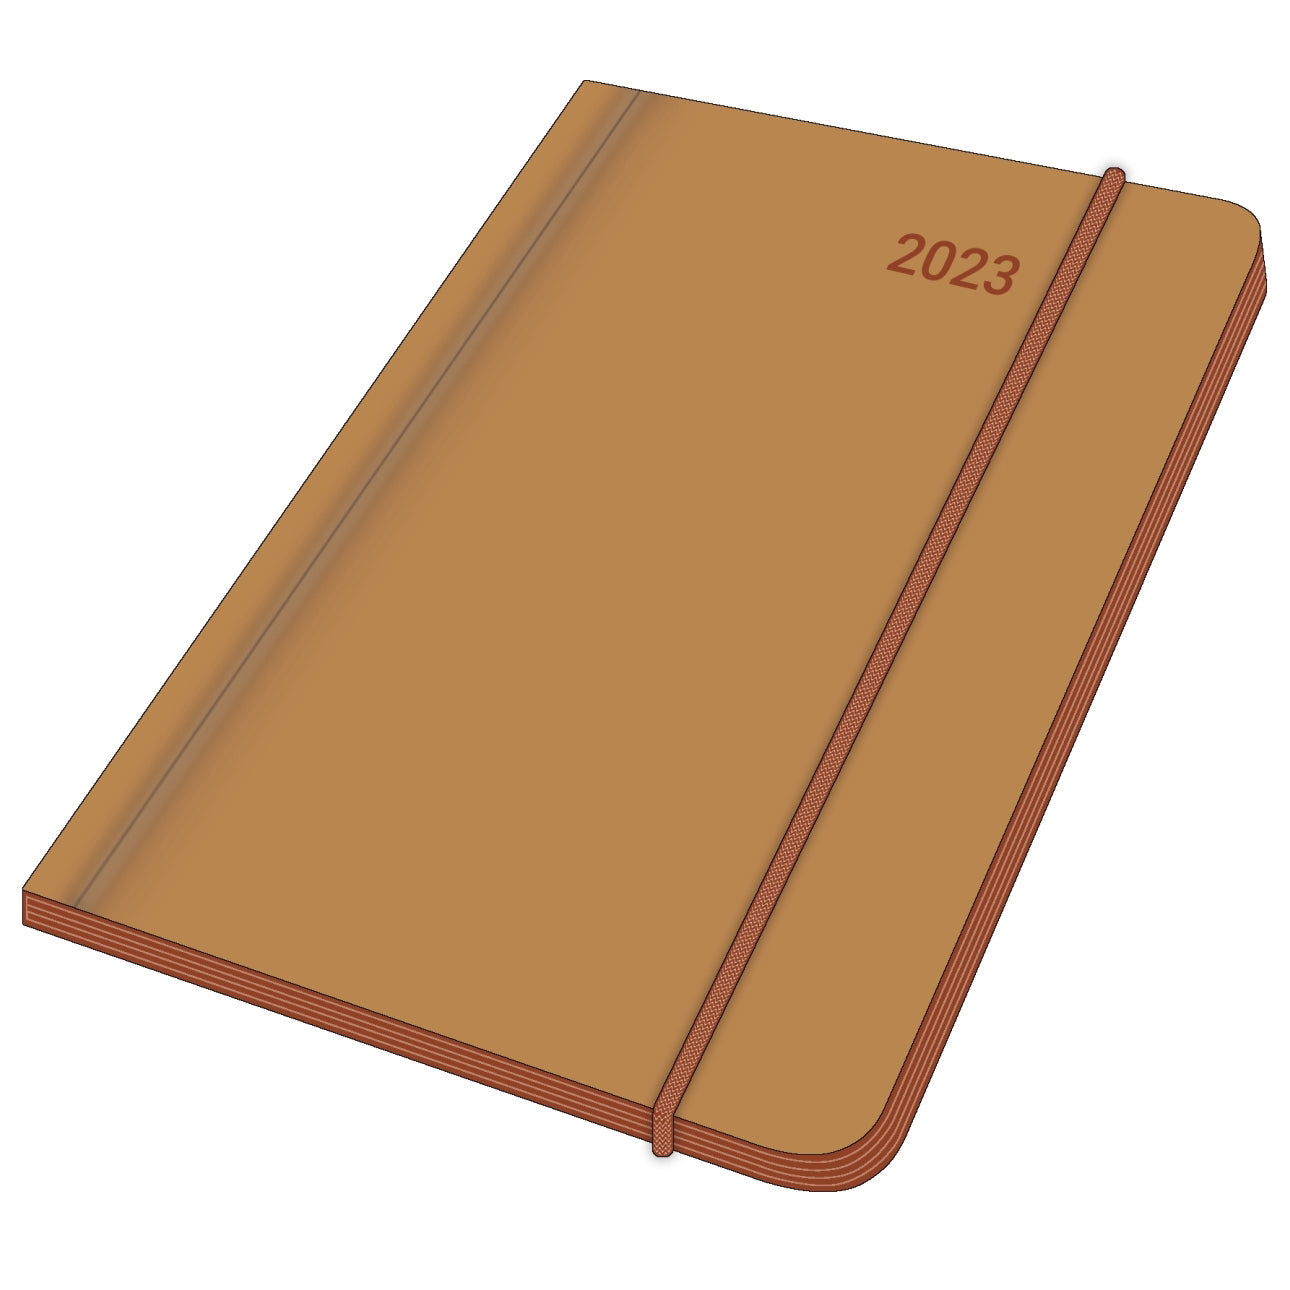 2023 Clay Weekly By Neumann - Diary/Planner